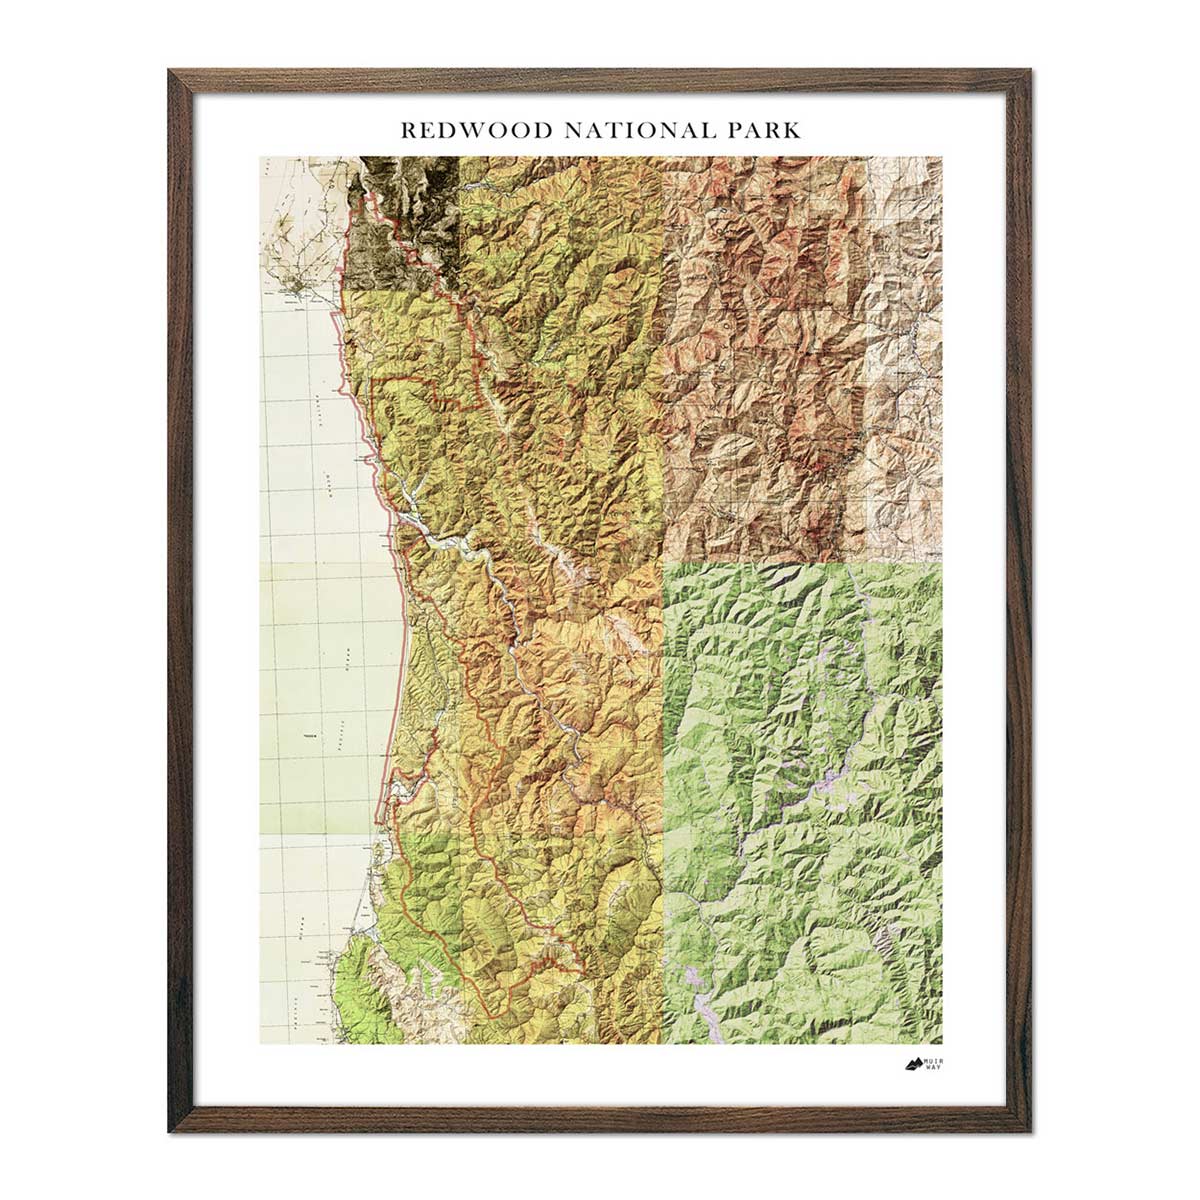 Redwood National Park Relief Map